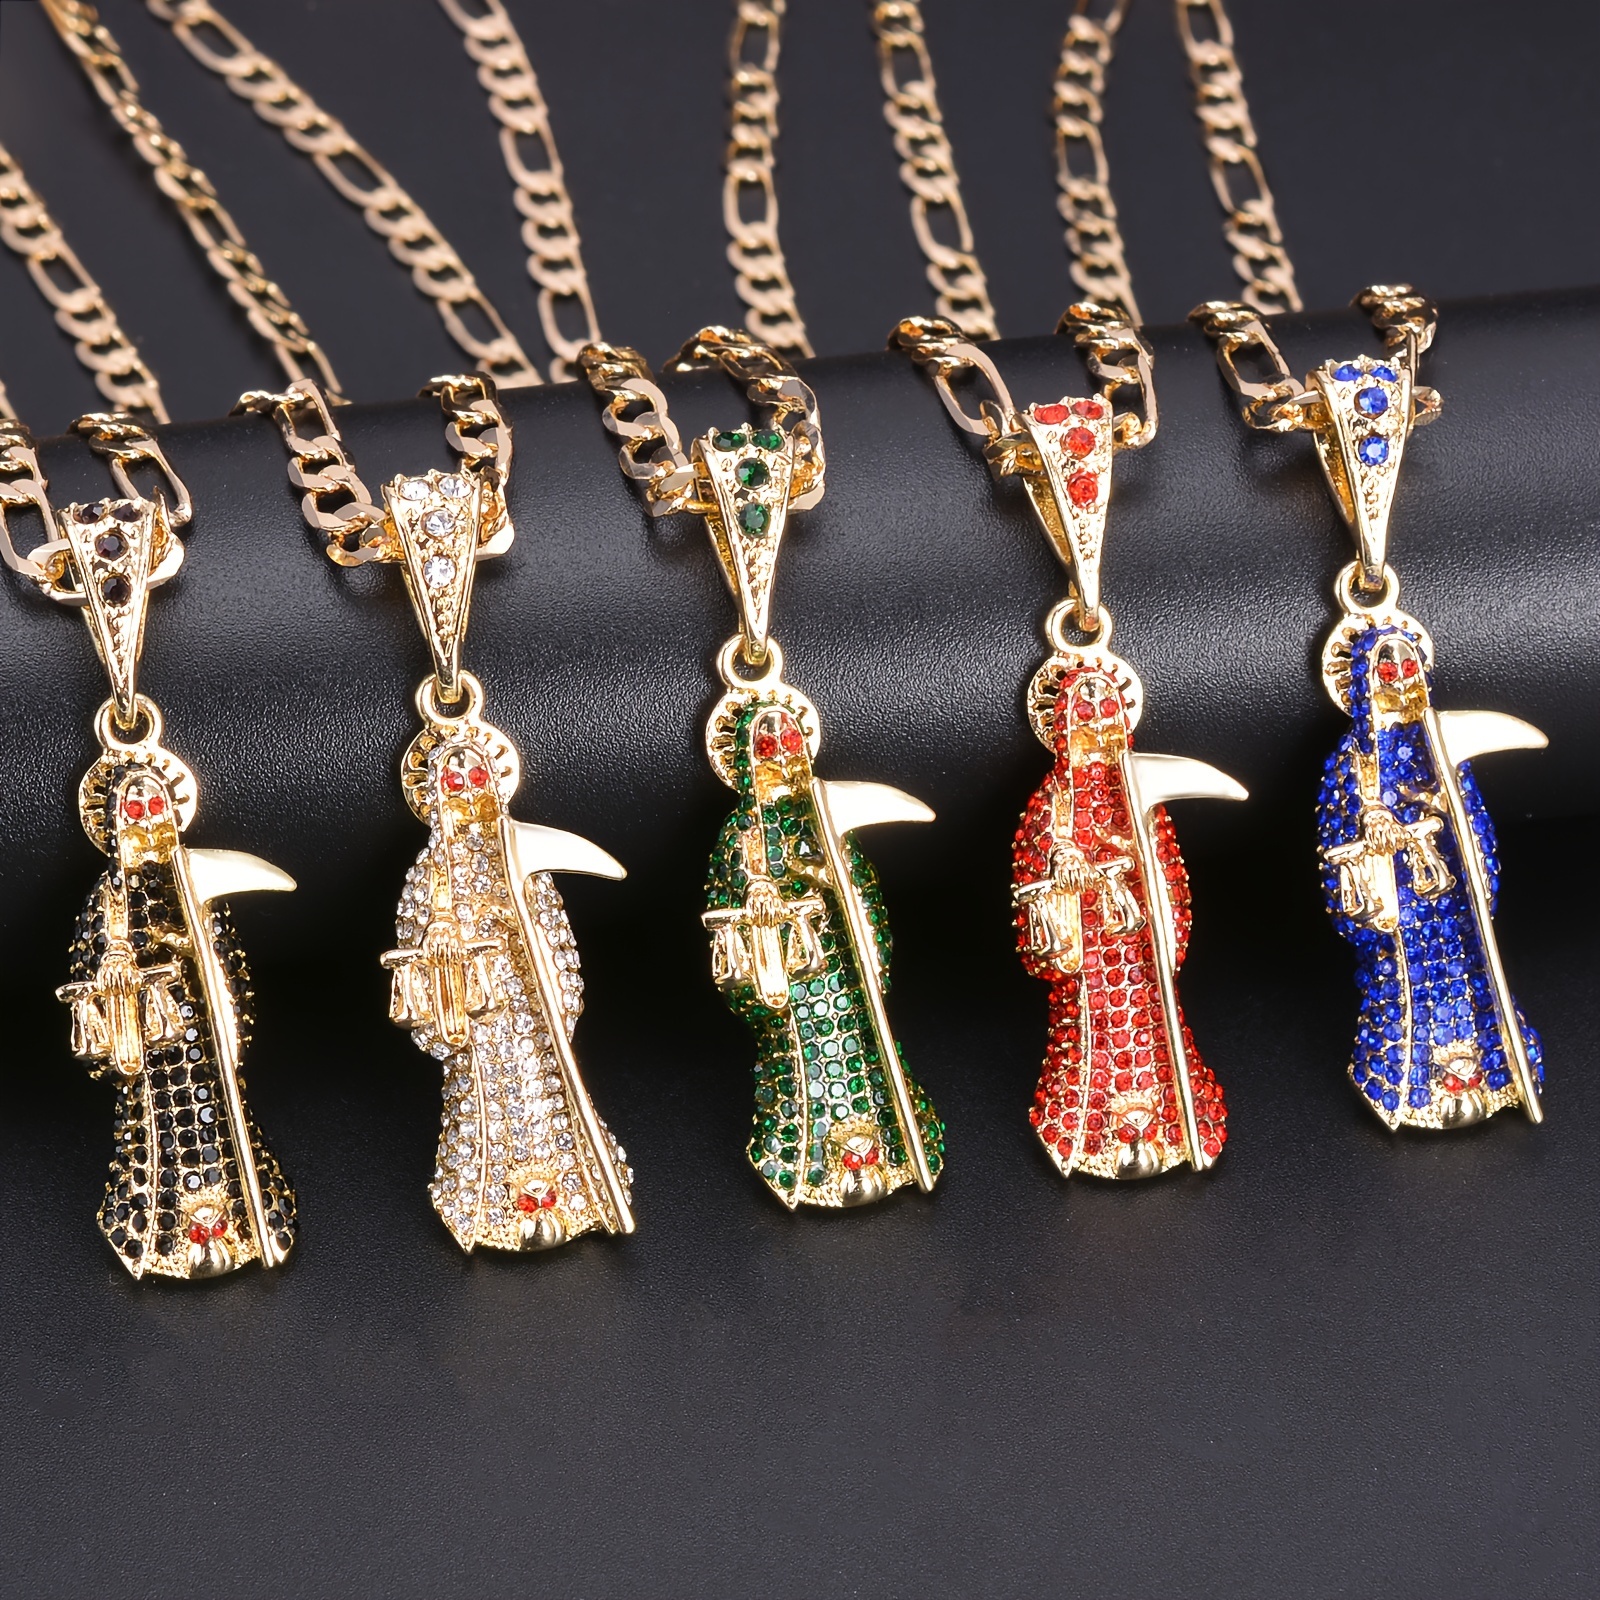 

Fashionable And Stylish Pendant Necklace, Holiday Gift, Religious Accessory For Men